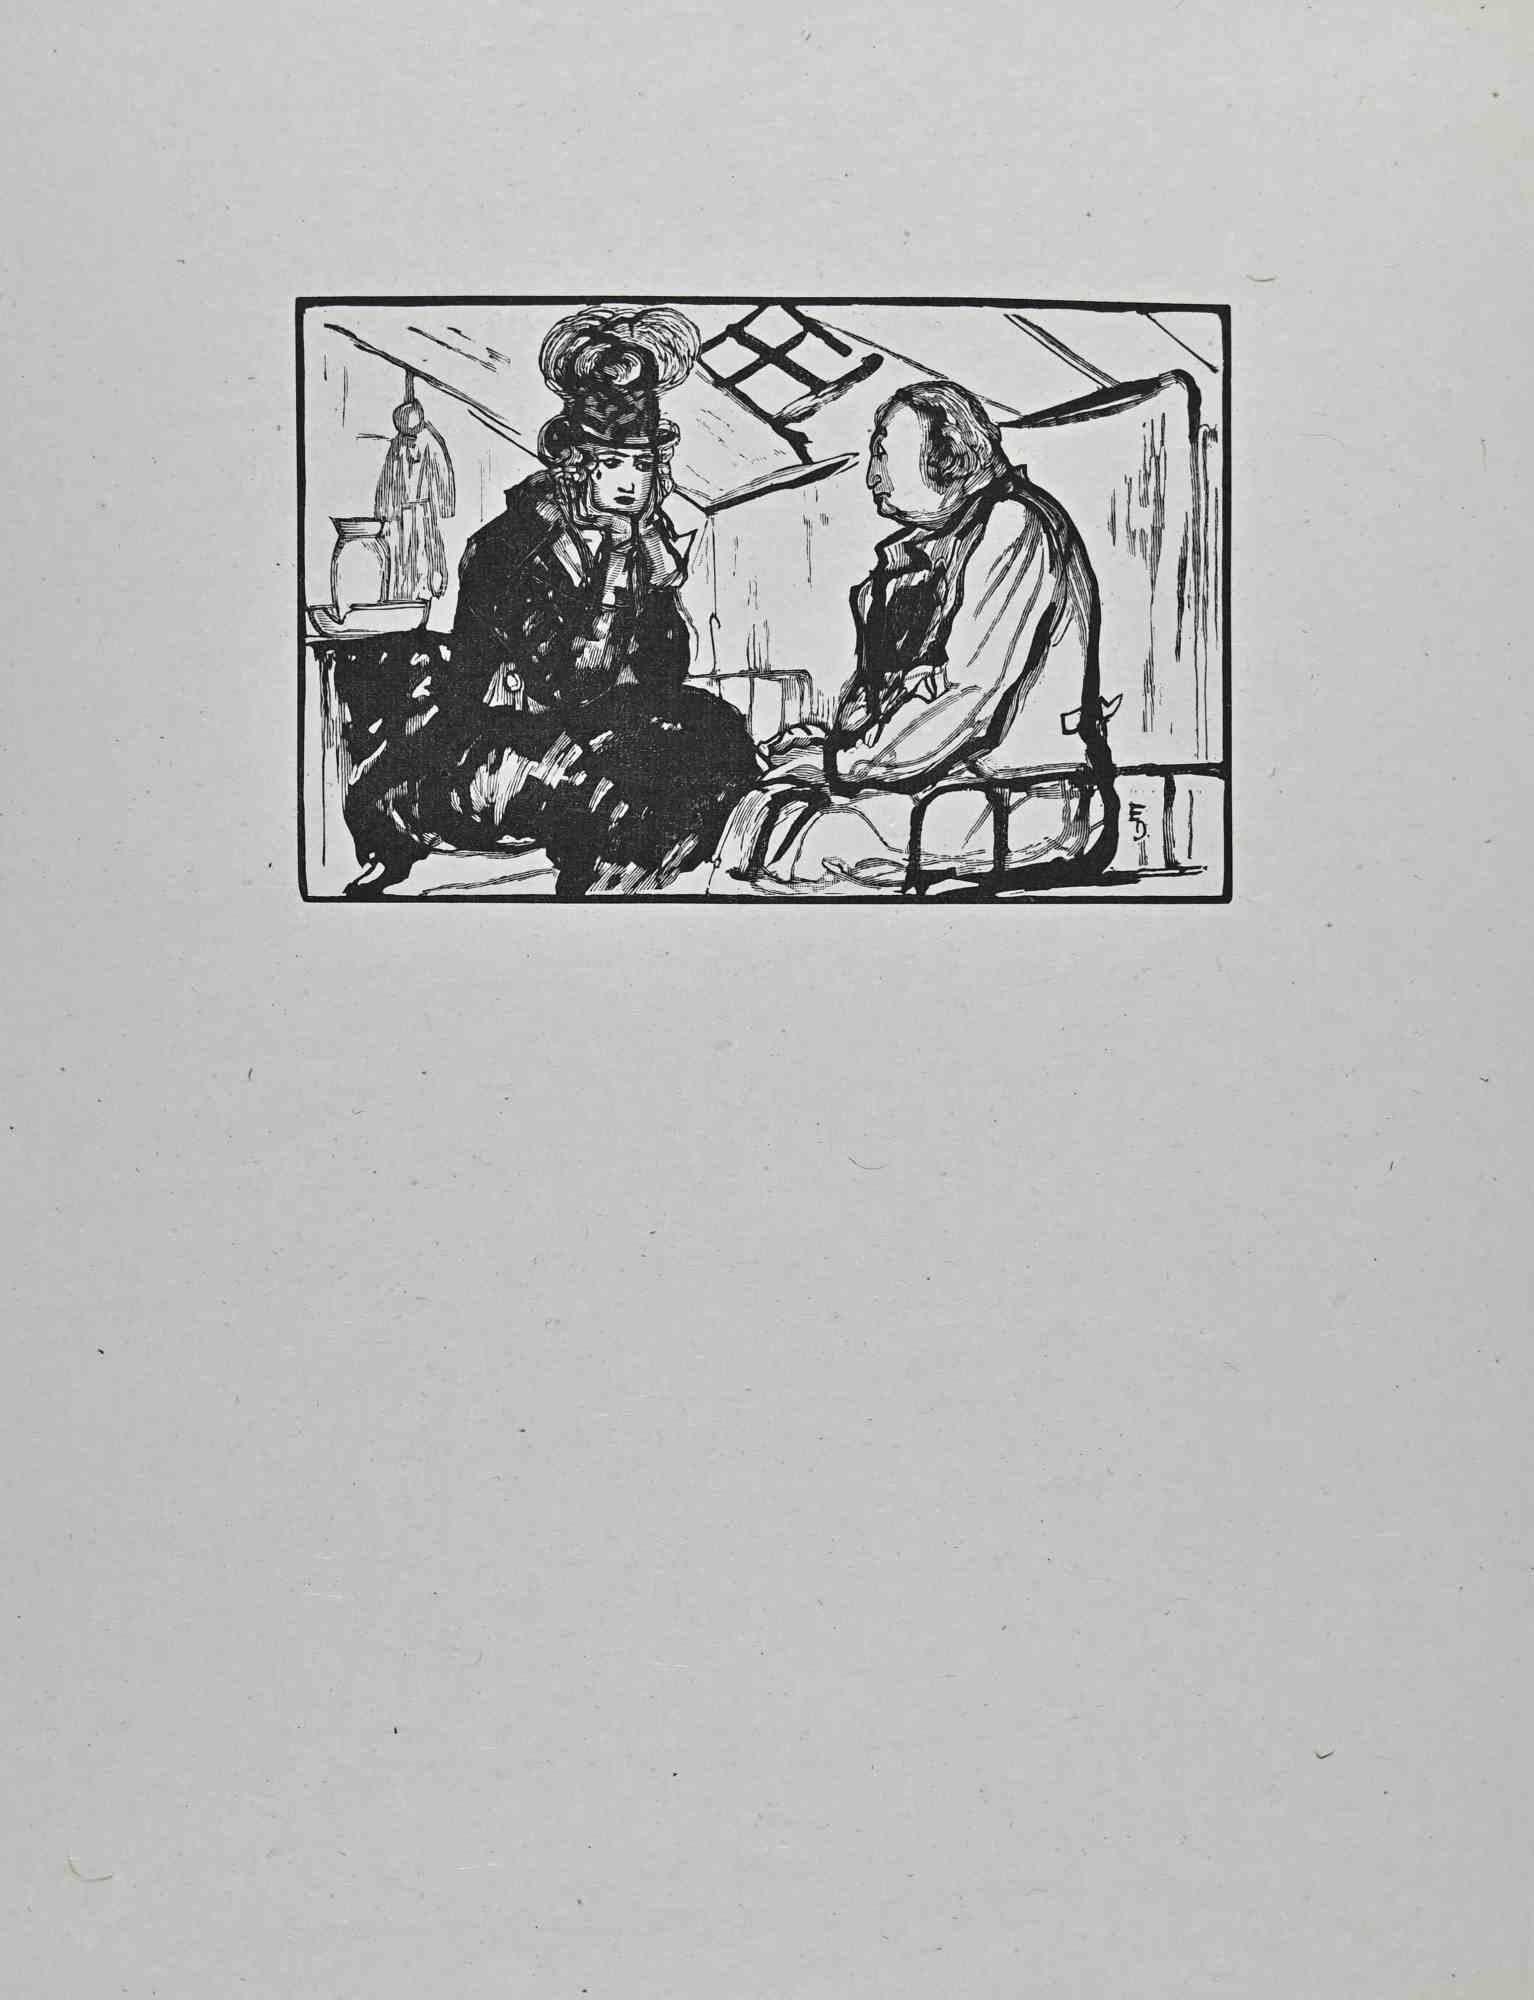 The Deep Conversation is a woodcut print on ivory-colored paper realized by Paul Baudier (1881-1962) in the 1930s.

Good conditions.

Paul Baudier, (born October 18, 1881 in Paris and died December 9, 1962 in Châtillon), was a French painter,